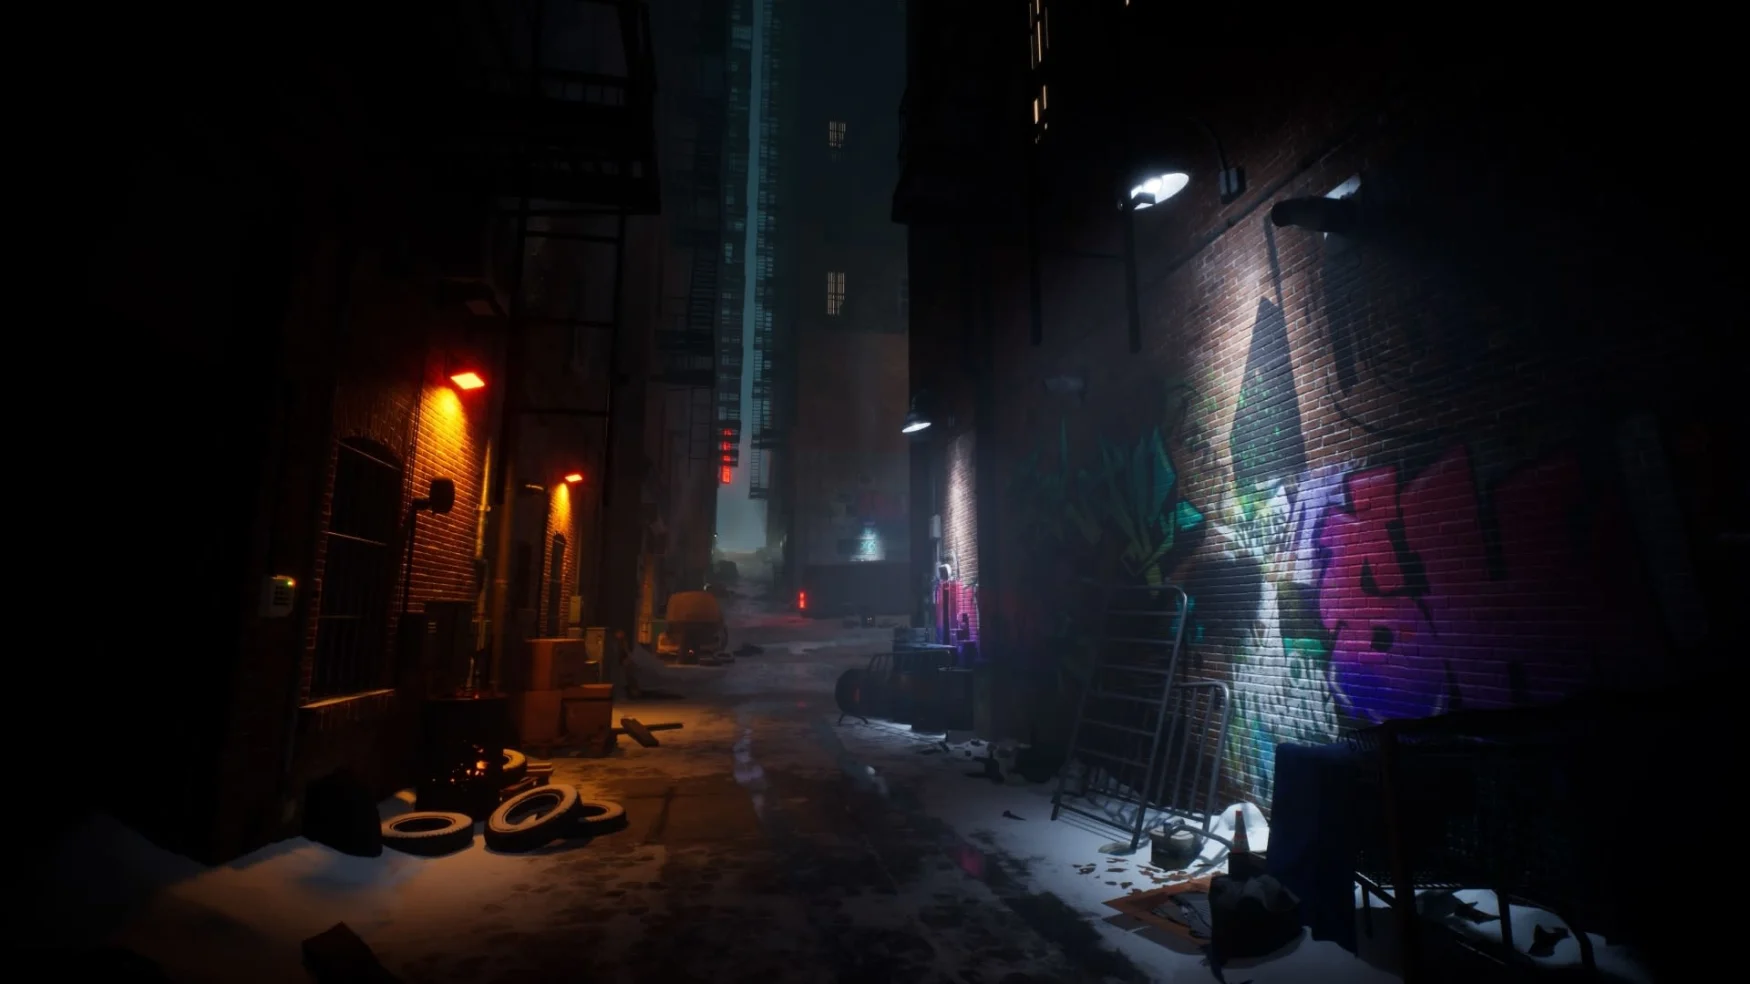 Videogame screenshot of a dark alley with street art, old tires and other random objects lying about.